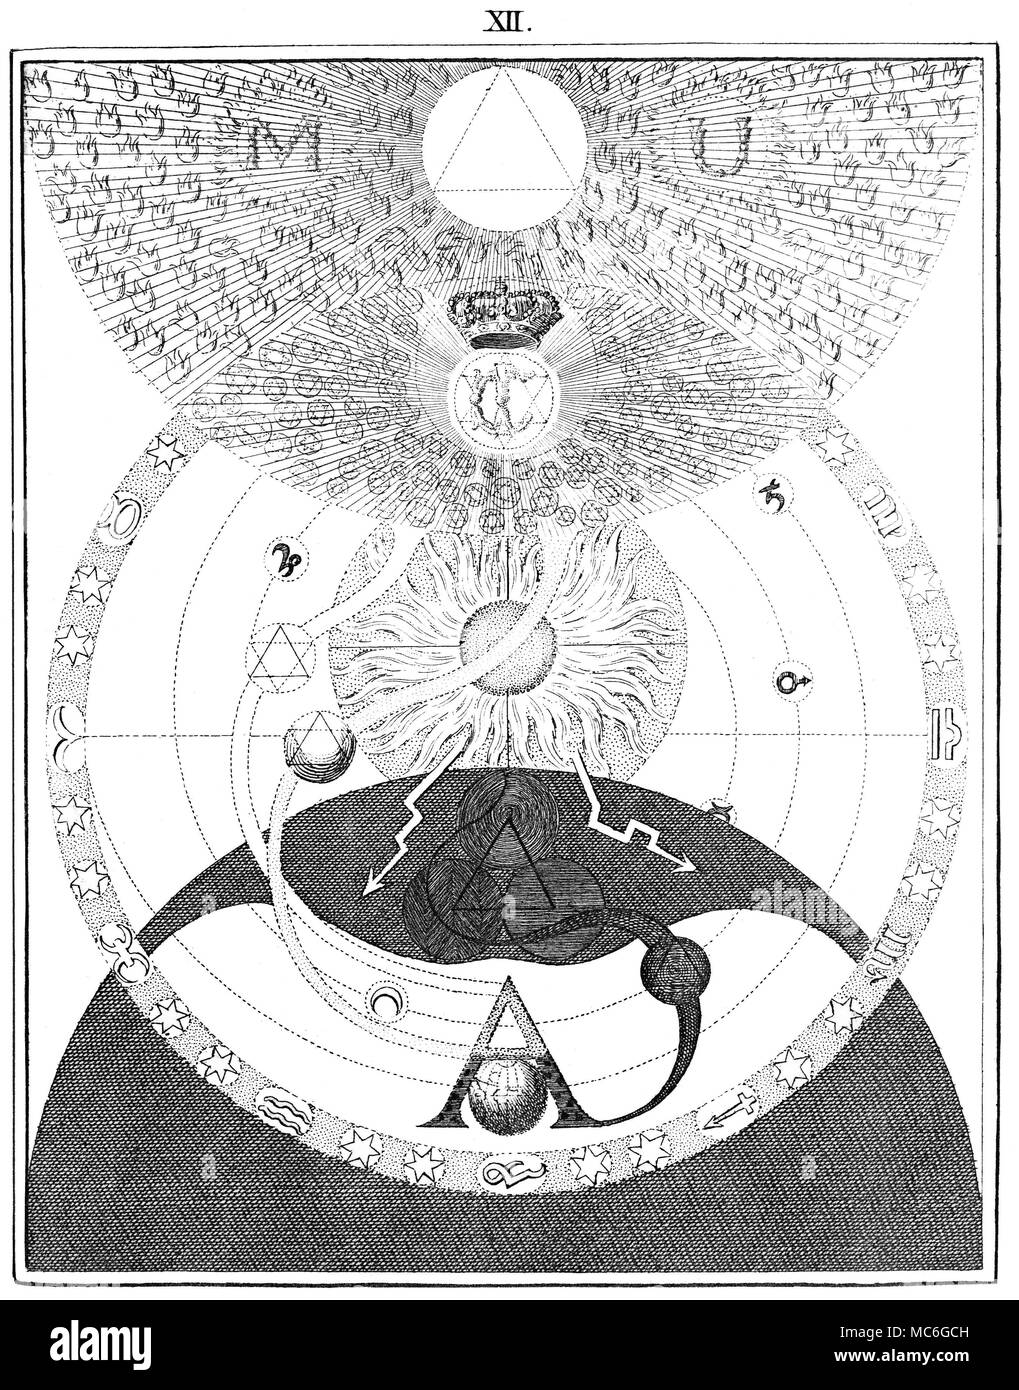 SYMBOLS - OCCULT ART - ROSICRUCIANS - SEPARATION One of a series of influential occult engravings by William Law, in explication of the principles in the arcane thought of the Rosicrucian, Jacob Boehme, from The Works of Jacob Behmen, The Teutonic Theosopher, Vol 1, 1764. Plate 12, which illustrates the extraordinary moment when Christ (named by Boehme, 'the Breaker') stands open the Gate, that the children of the first Adam might follow him into Paradise, 'which could not be done by any Soul before that Time'. Within a circular band, which contains 9 signs of the zodiac (Gemini, Cancer and Stock Photo